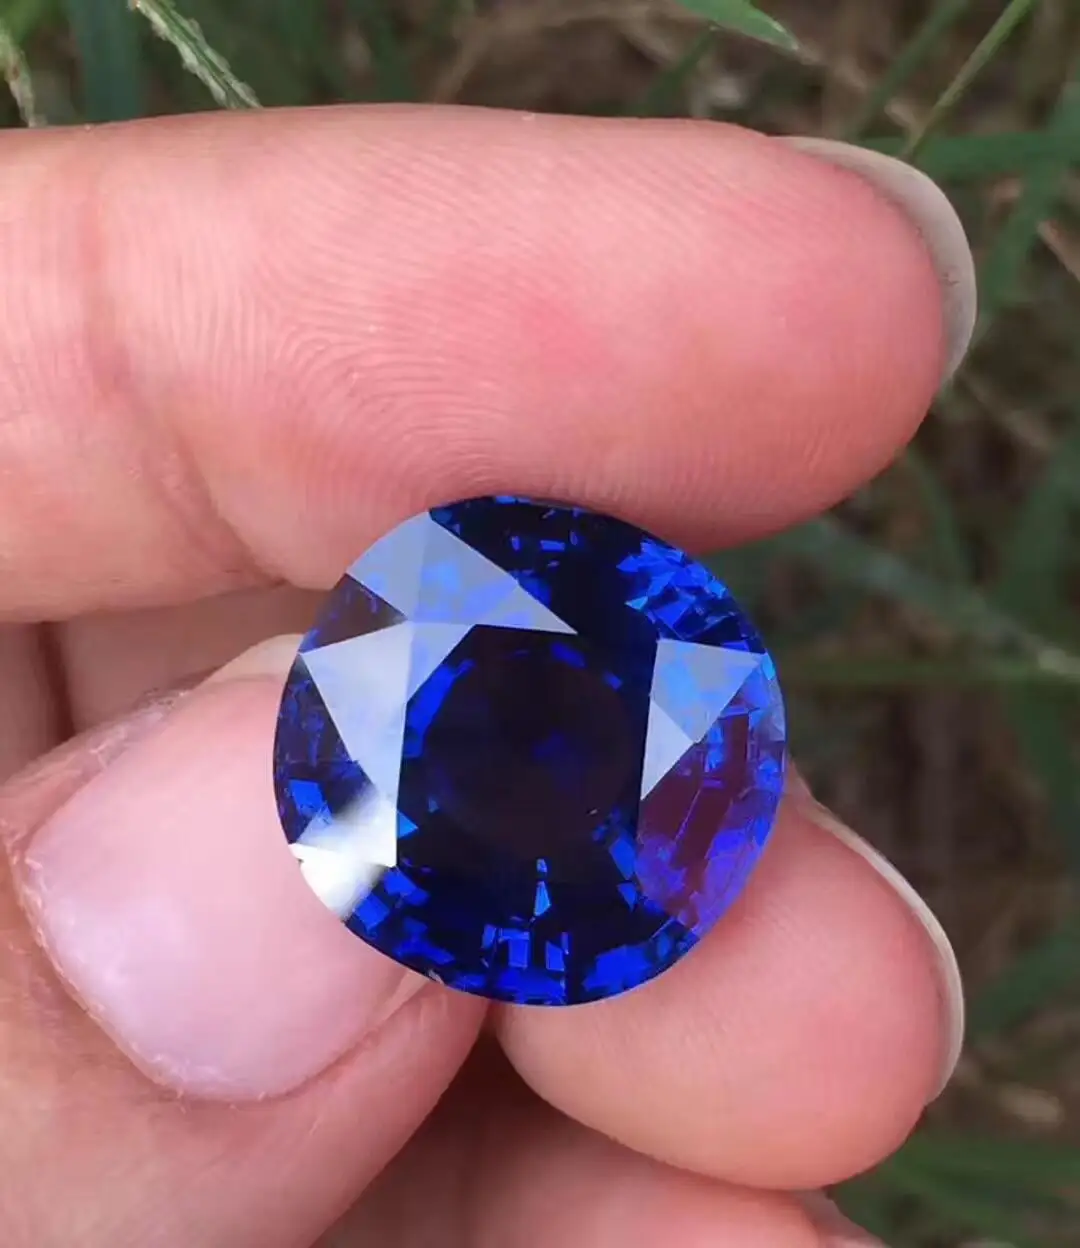 Best Selling 3x3mm Natural Blue Sapphire Cushion Cut Gemstone for Decoration Worldwide Export from India